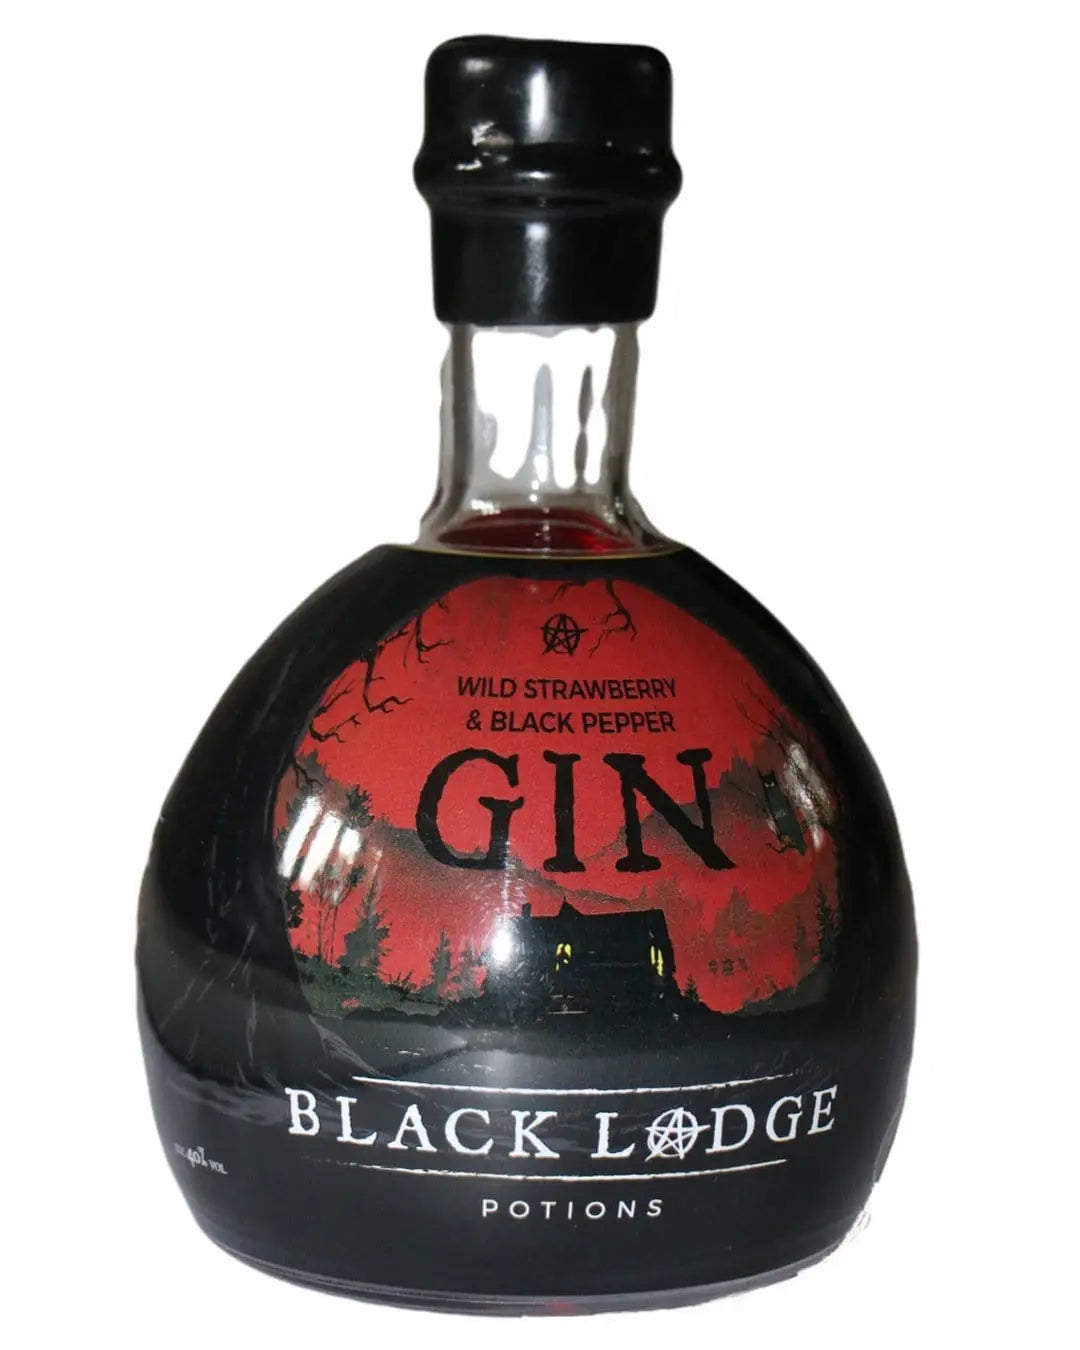 Black Lodge Potions Wild Strawberry & Black Pepper Gin, 70 cl Gin